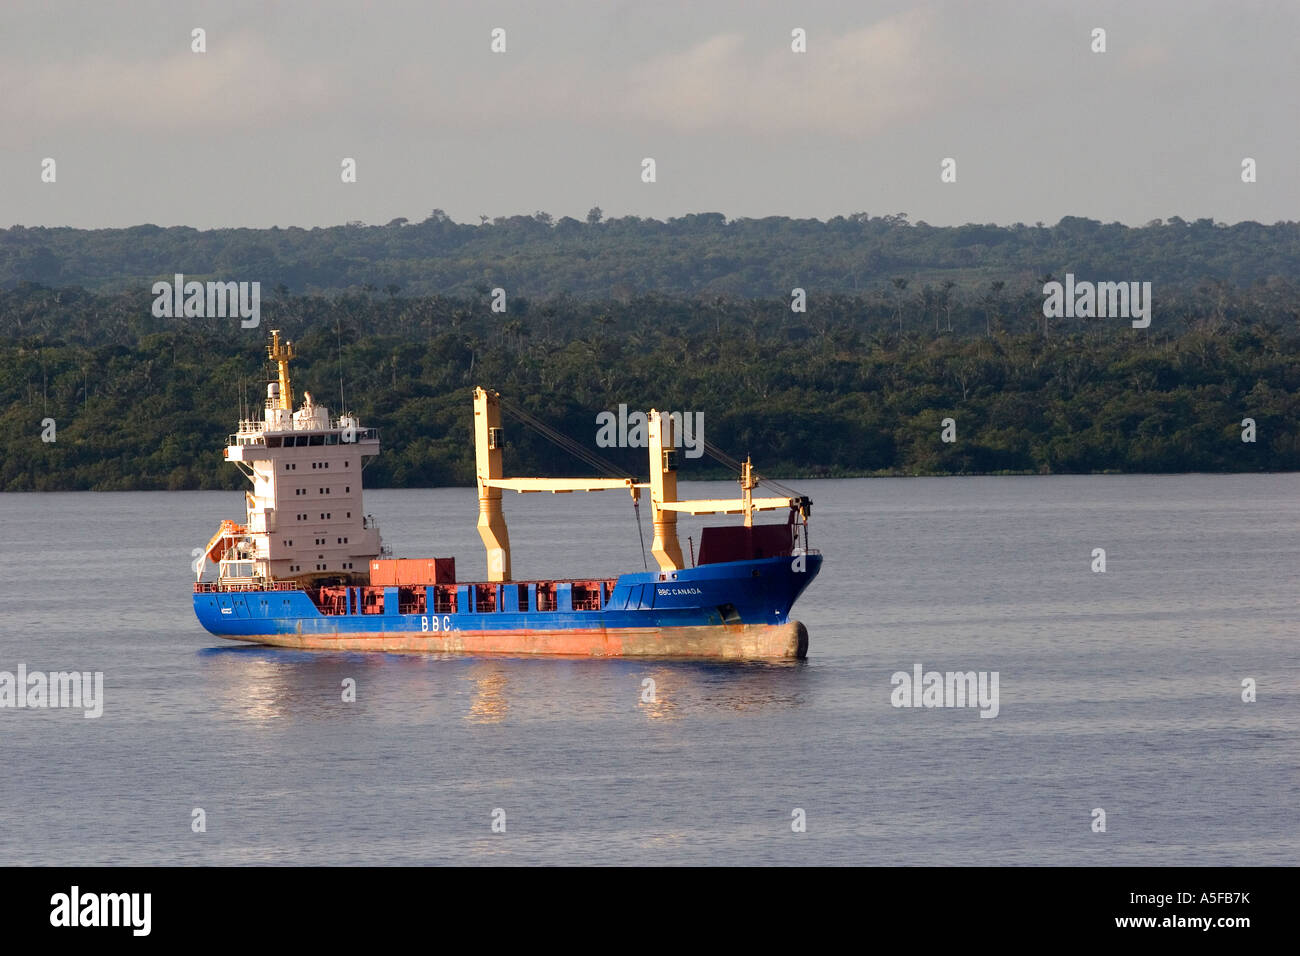 A container ship on the Amazon River at Manaus Brazil Stock Photo - Alamy